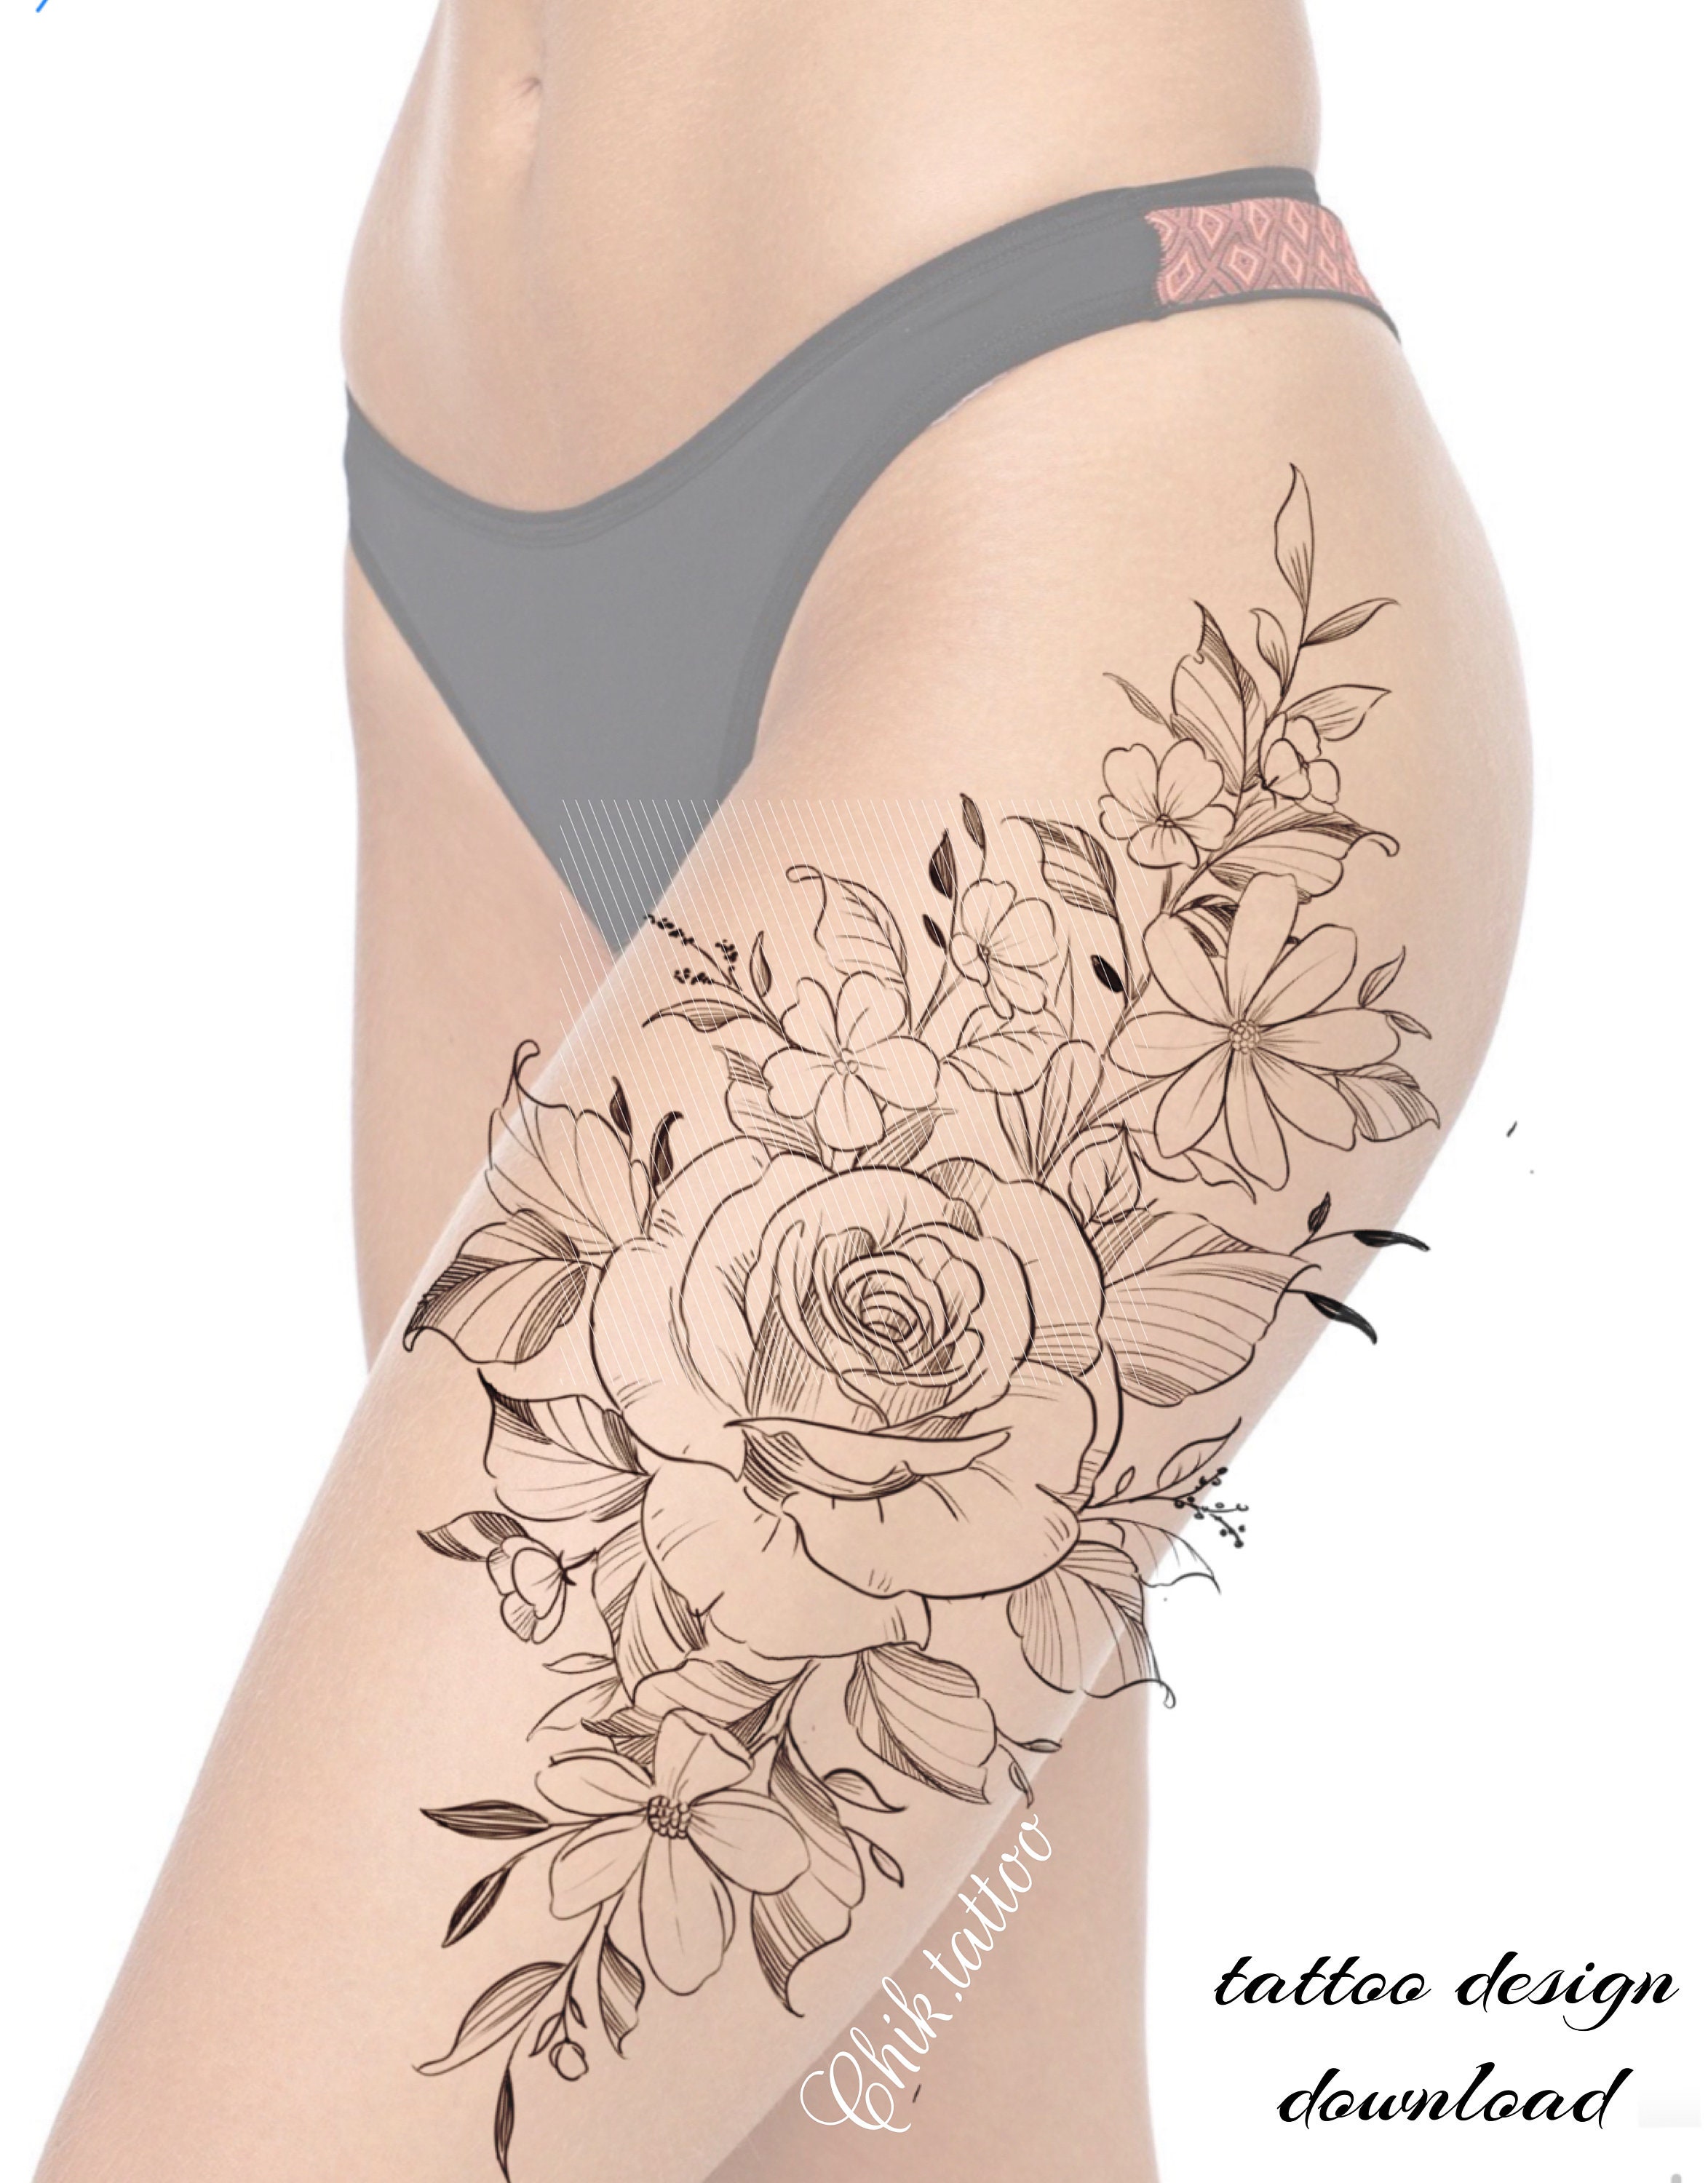 80 Thigh Tattoo Ideas For Women That Will Make You Want To Flash Some Leg